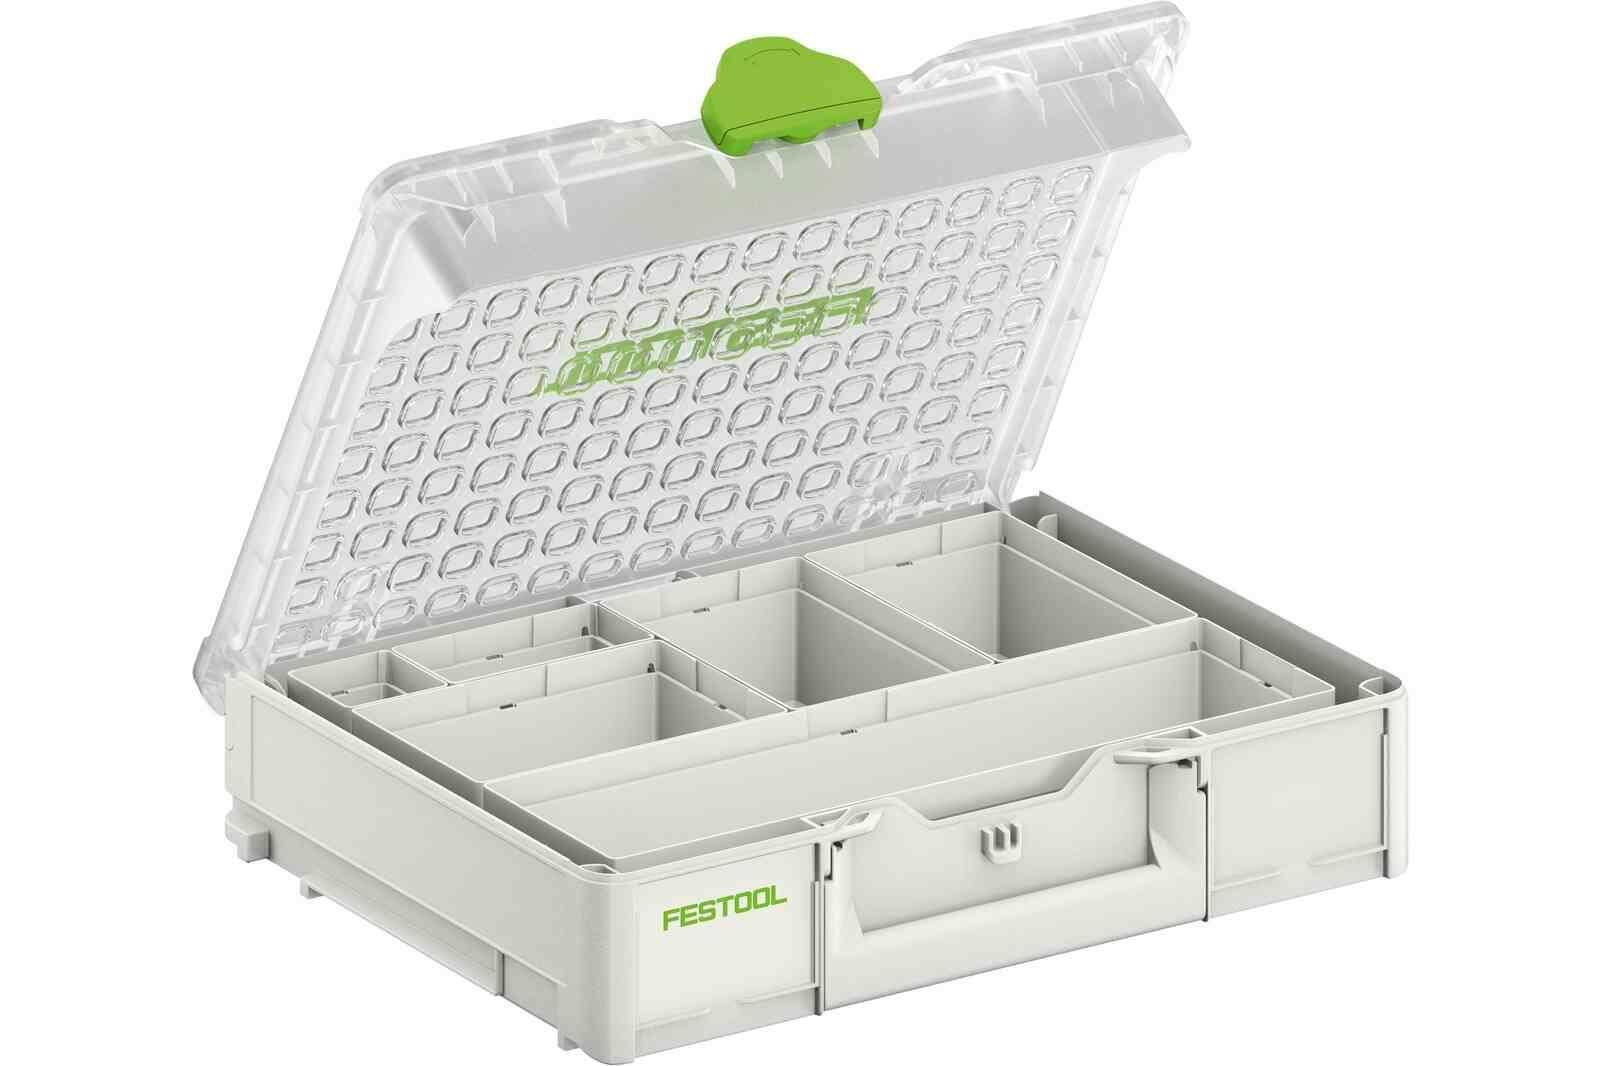 FESTOOL 204854 Systainer3 Organizer SYS3